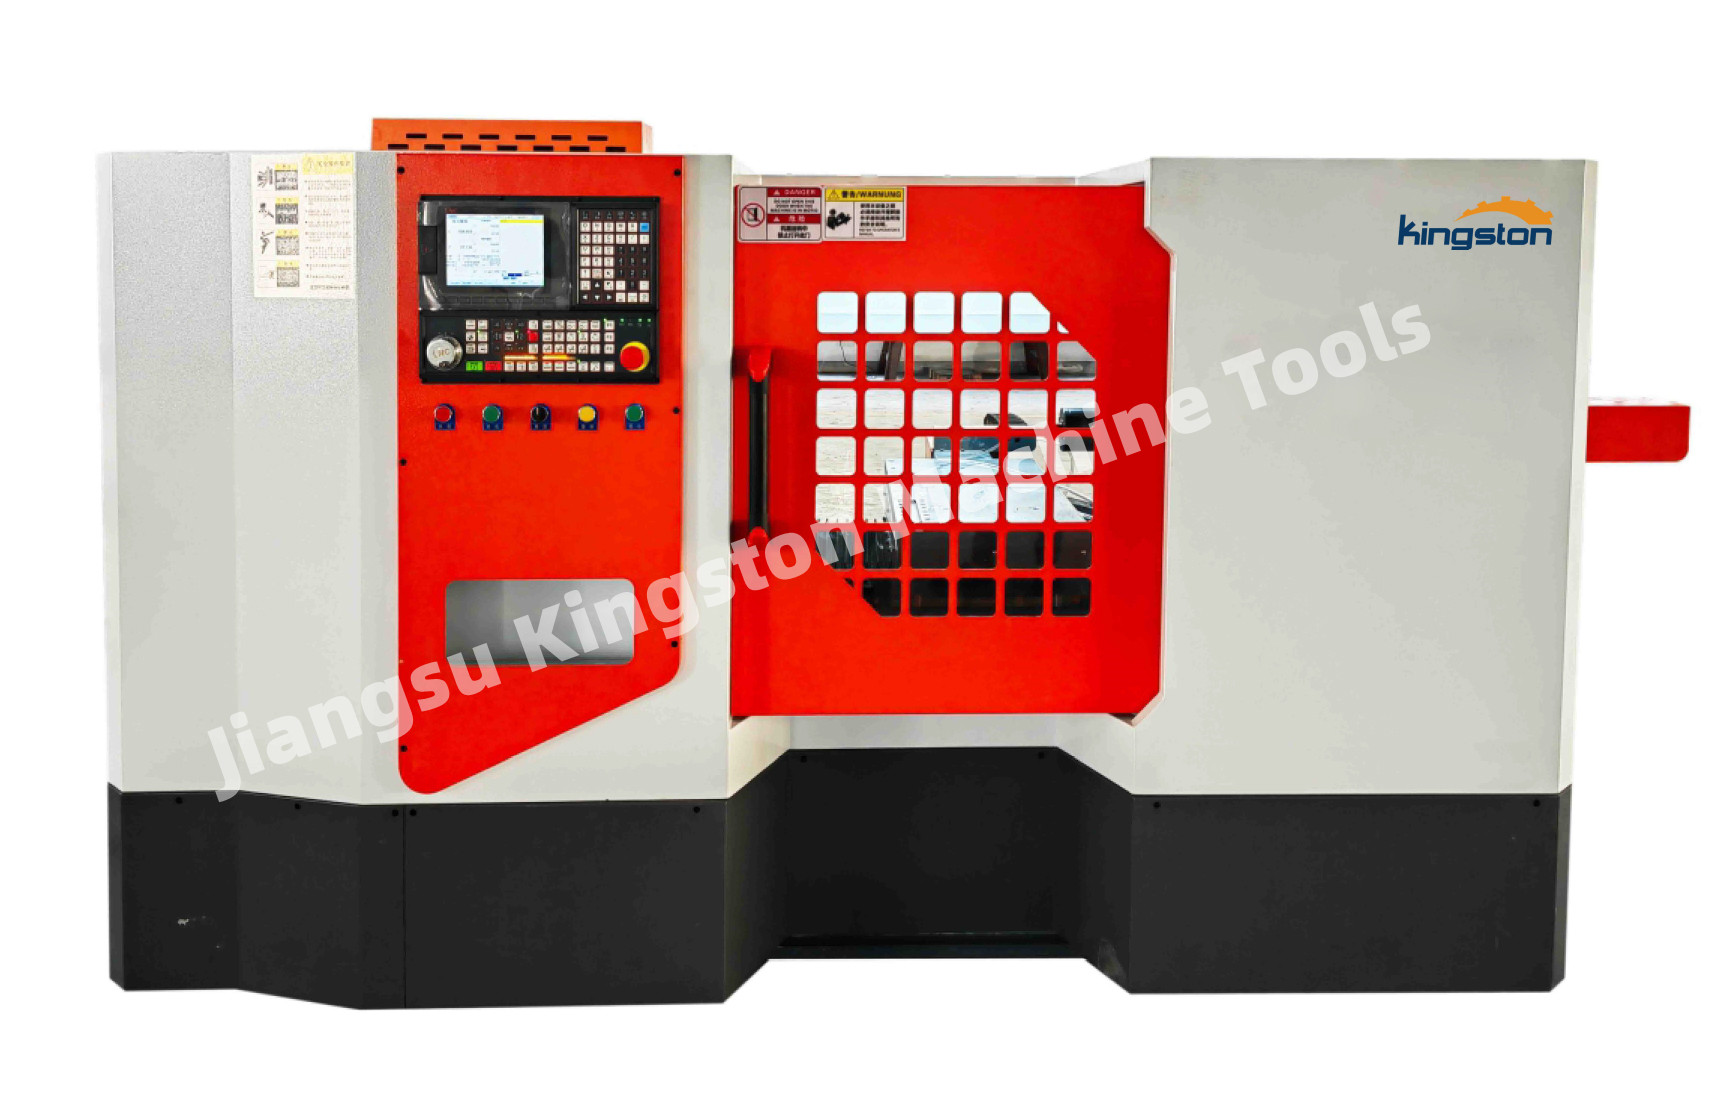 Kingston Brand CNC Metal Spinning and Forming Machine SG300